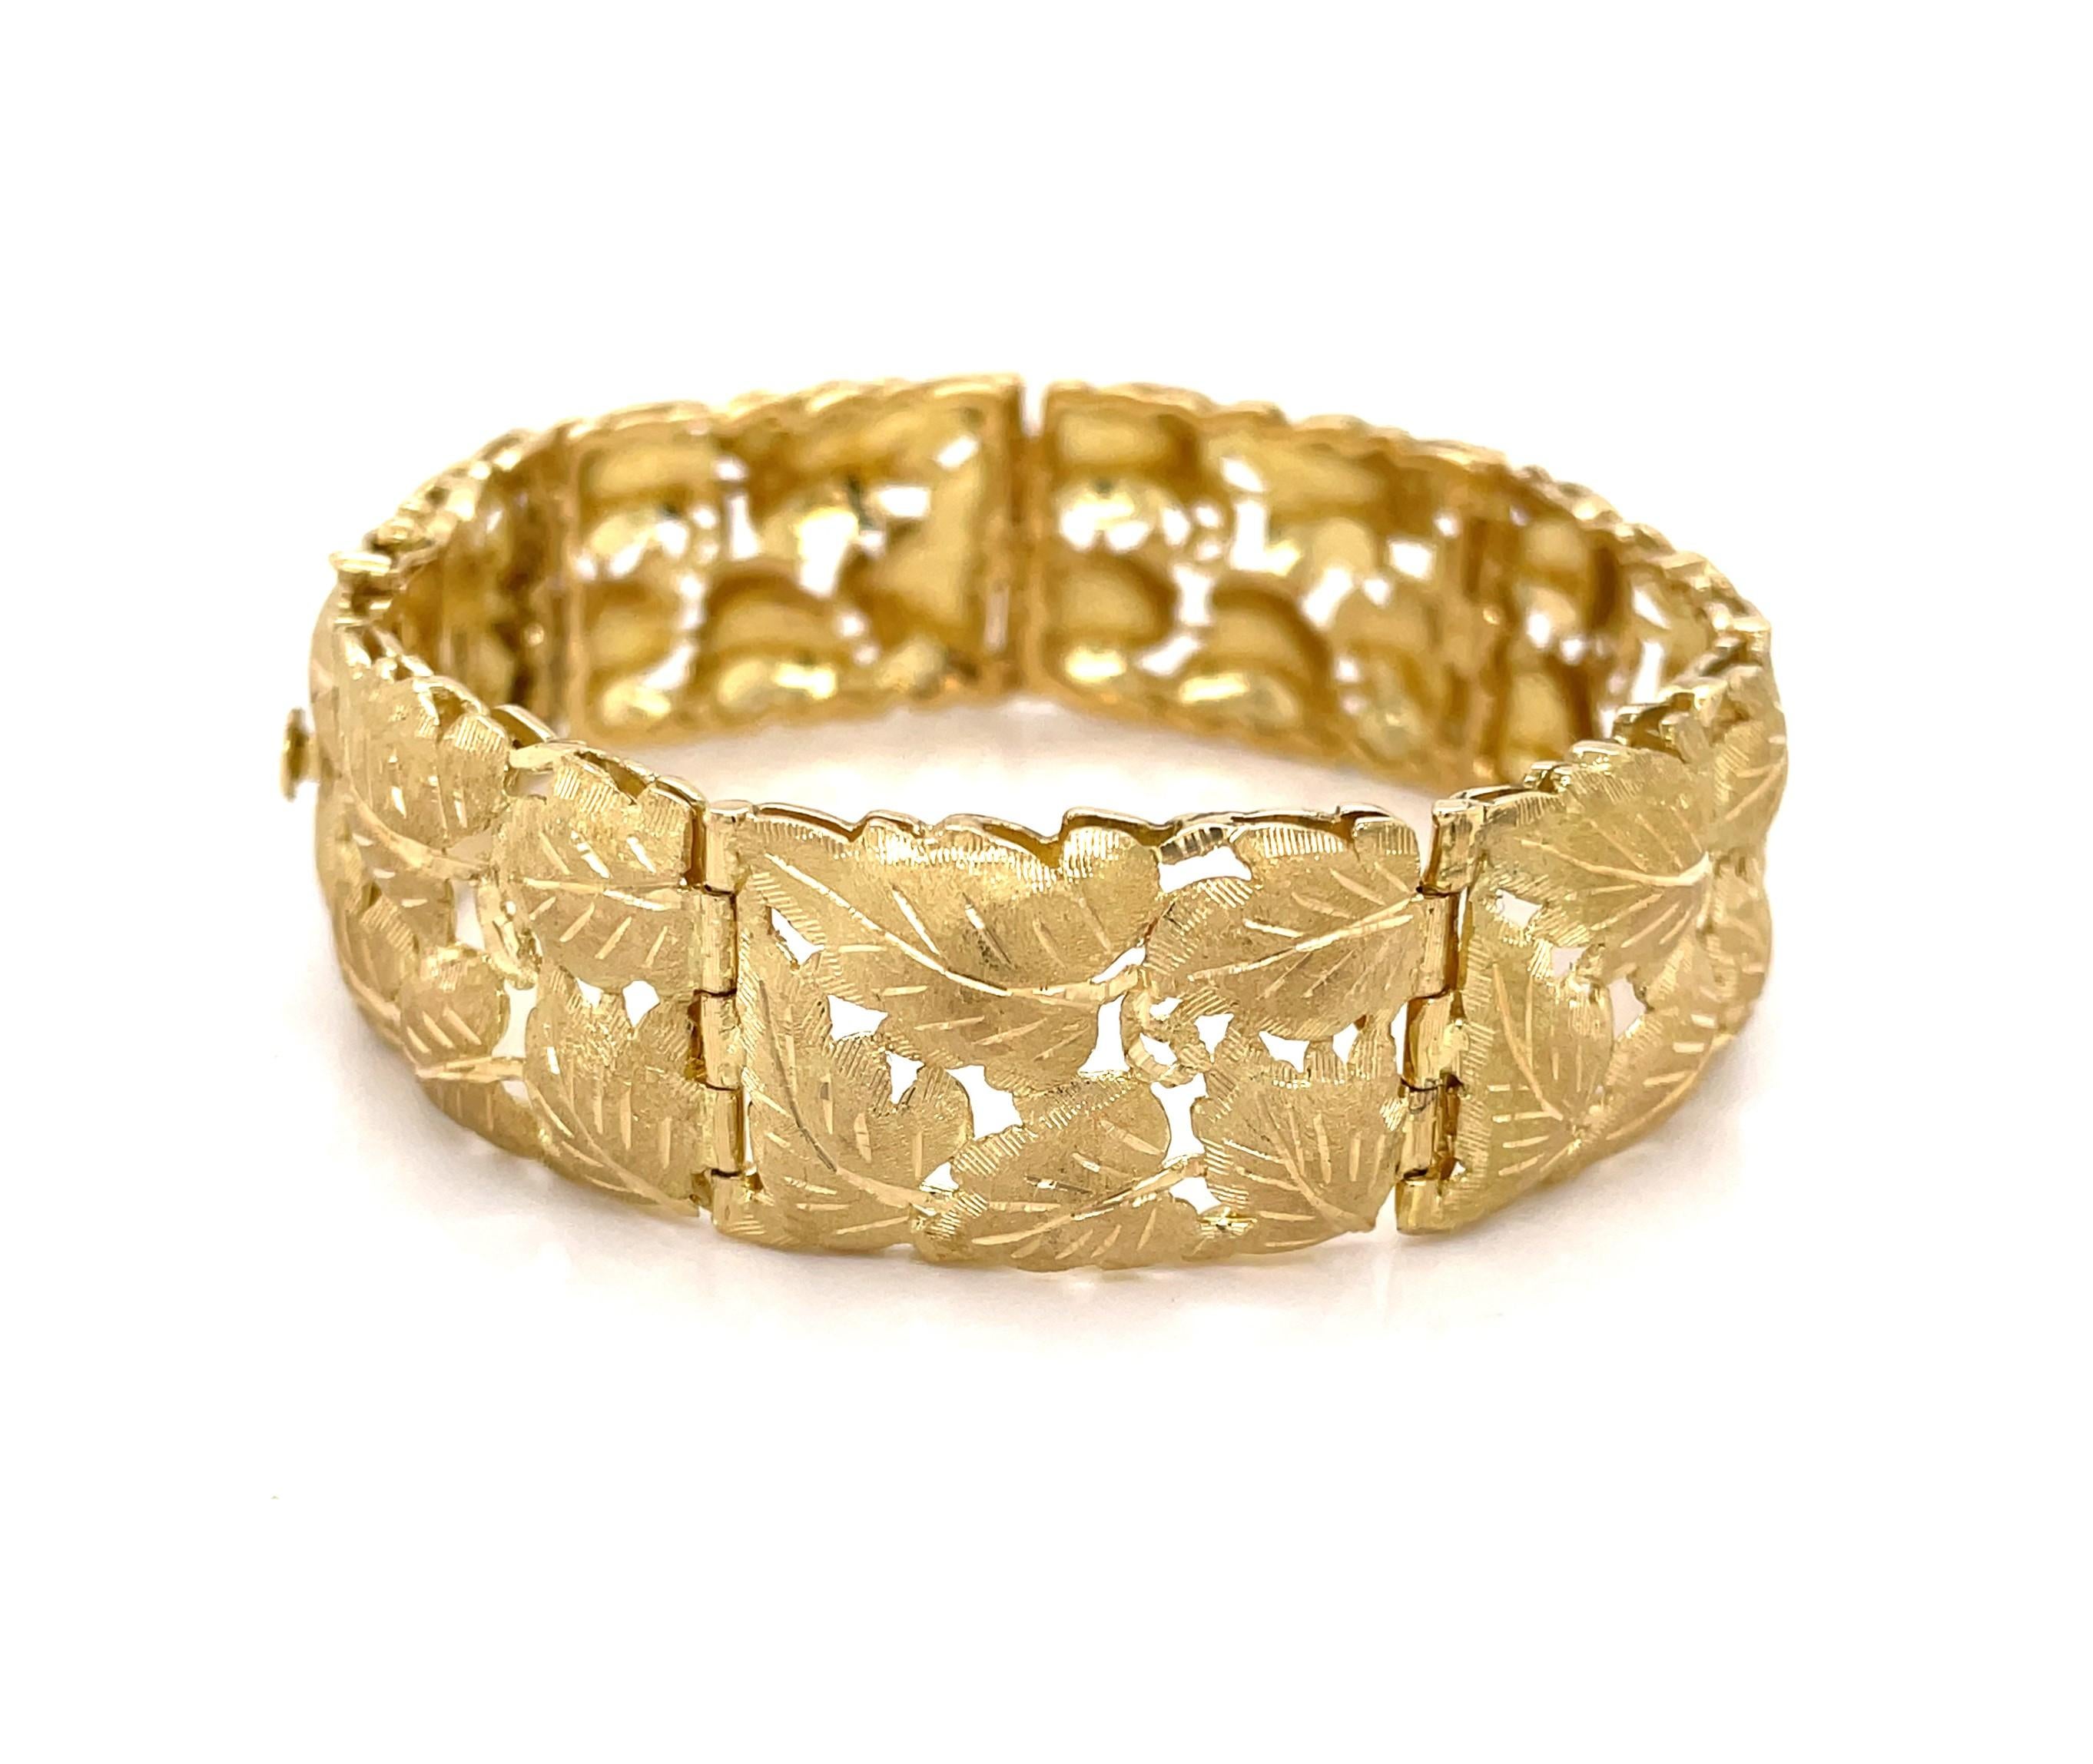 Elegant in 18K eighteen karat yellow gold, this fine link bracelet by Italian designer Fabbrini displays with mixed textures of satin and bright finishes to enhance intricate detail of the grape leaf inspired design. The pleasing open lattice